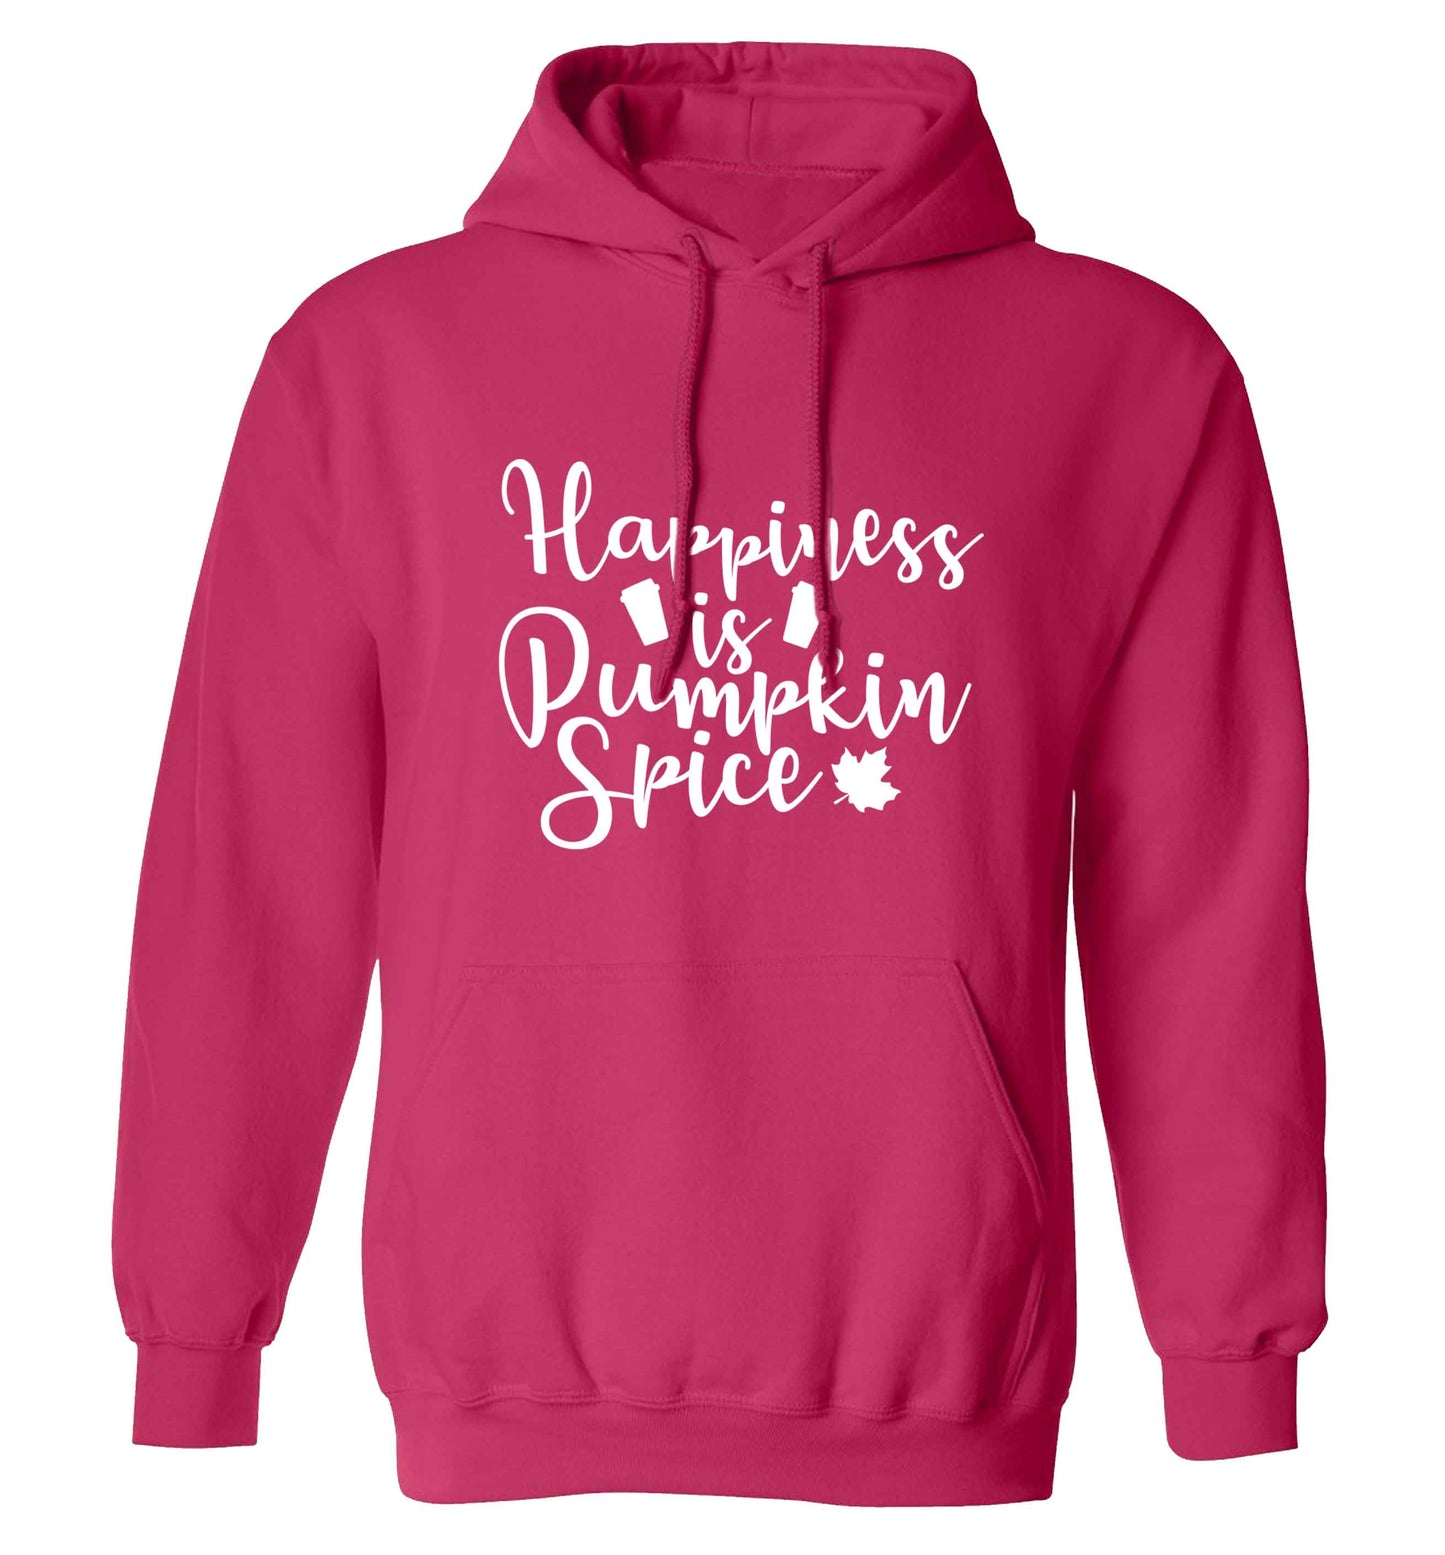 Happiness Pumpkin Spice adults unisex pink hoodie 2XL